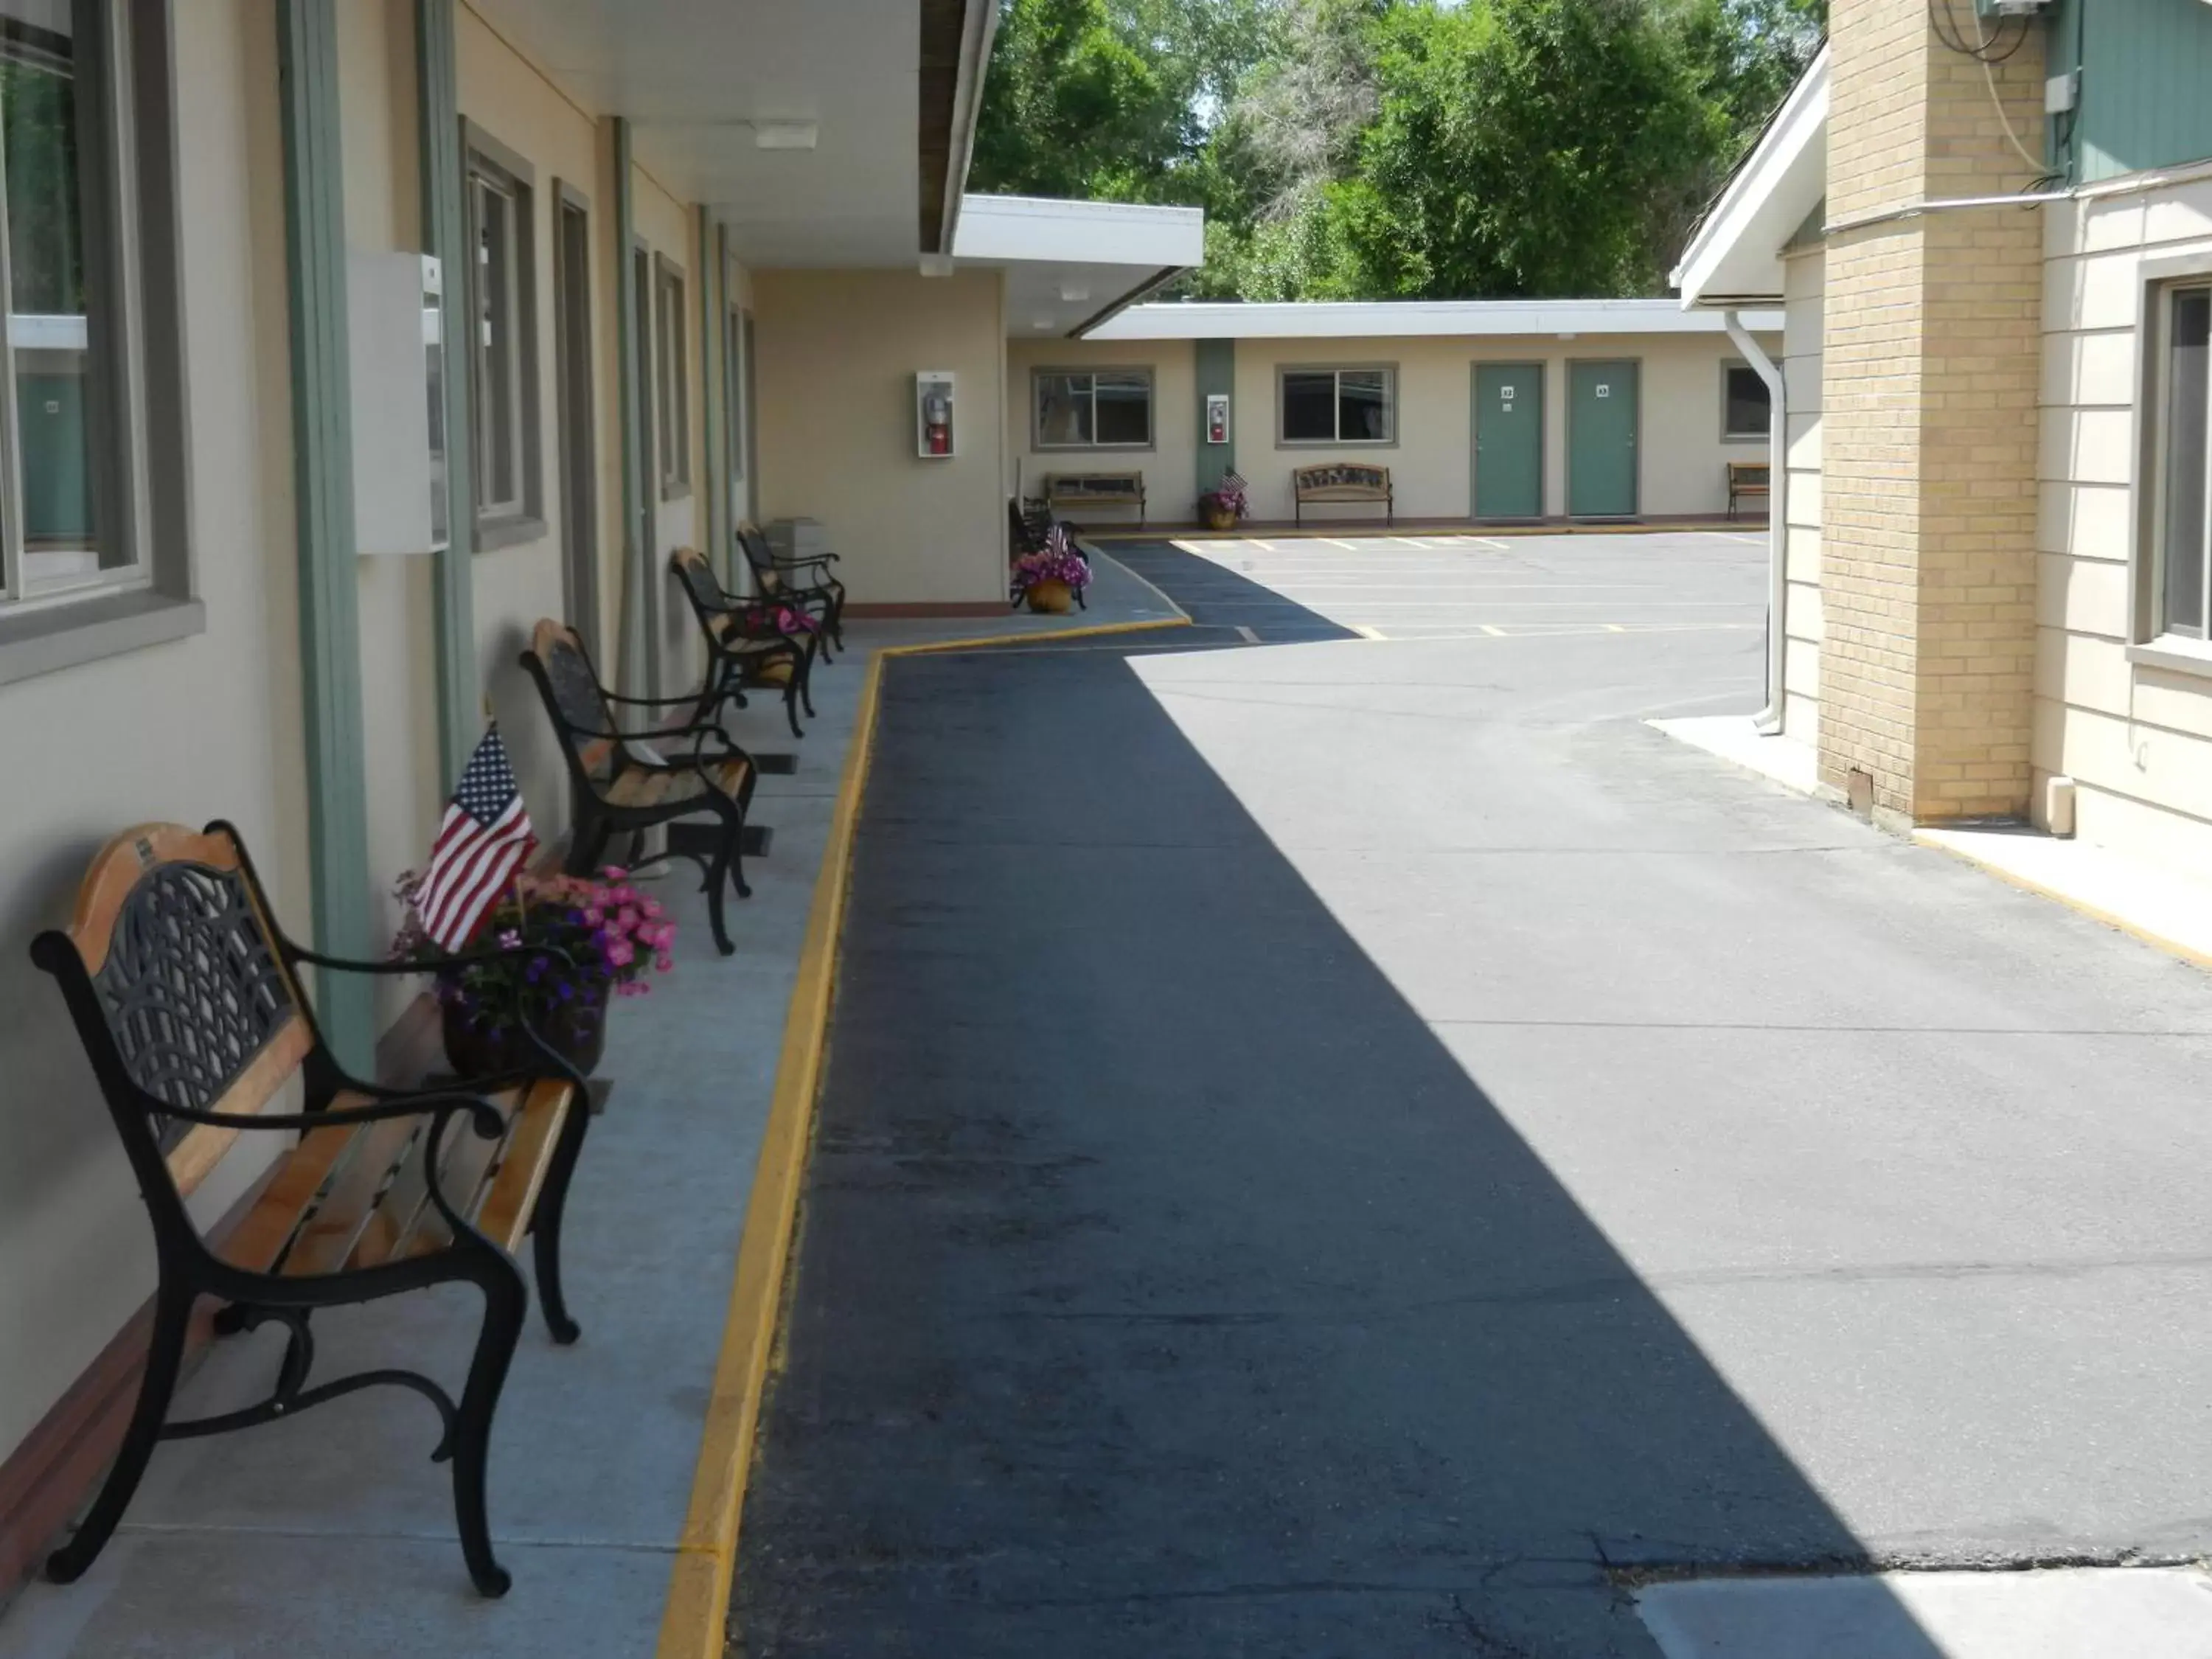 Area and facilities in Paintbrush Motel